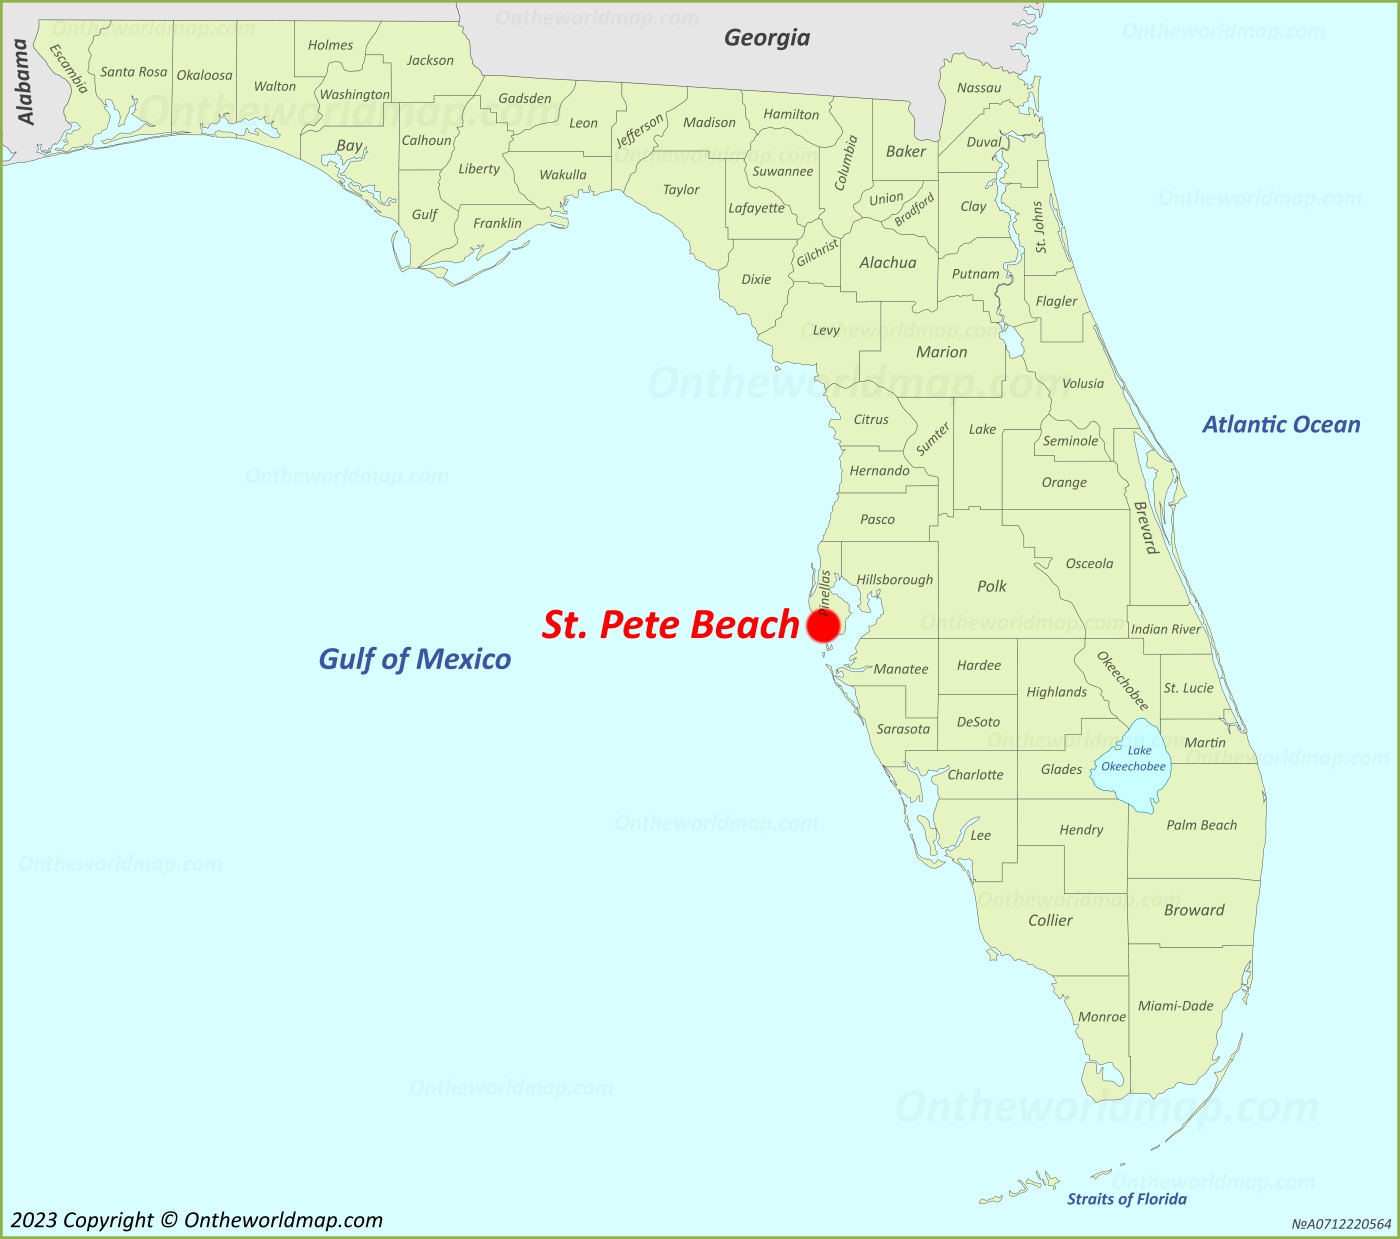 St Pete Beach Location On The Florida Map